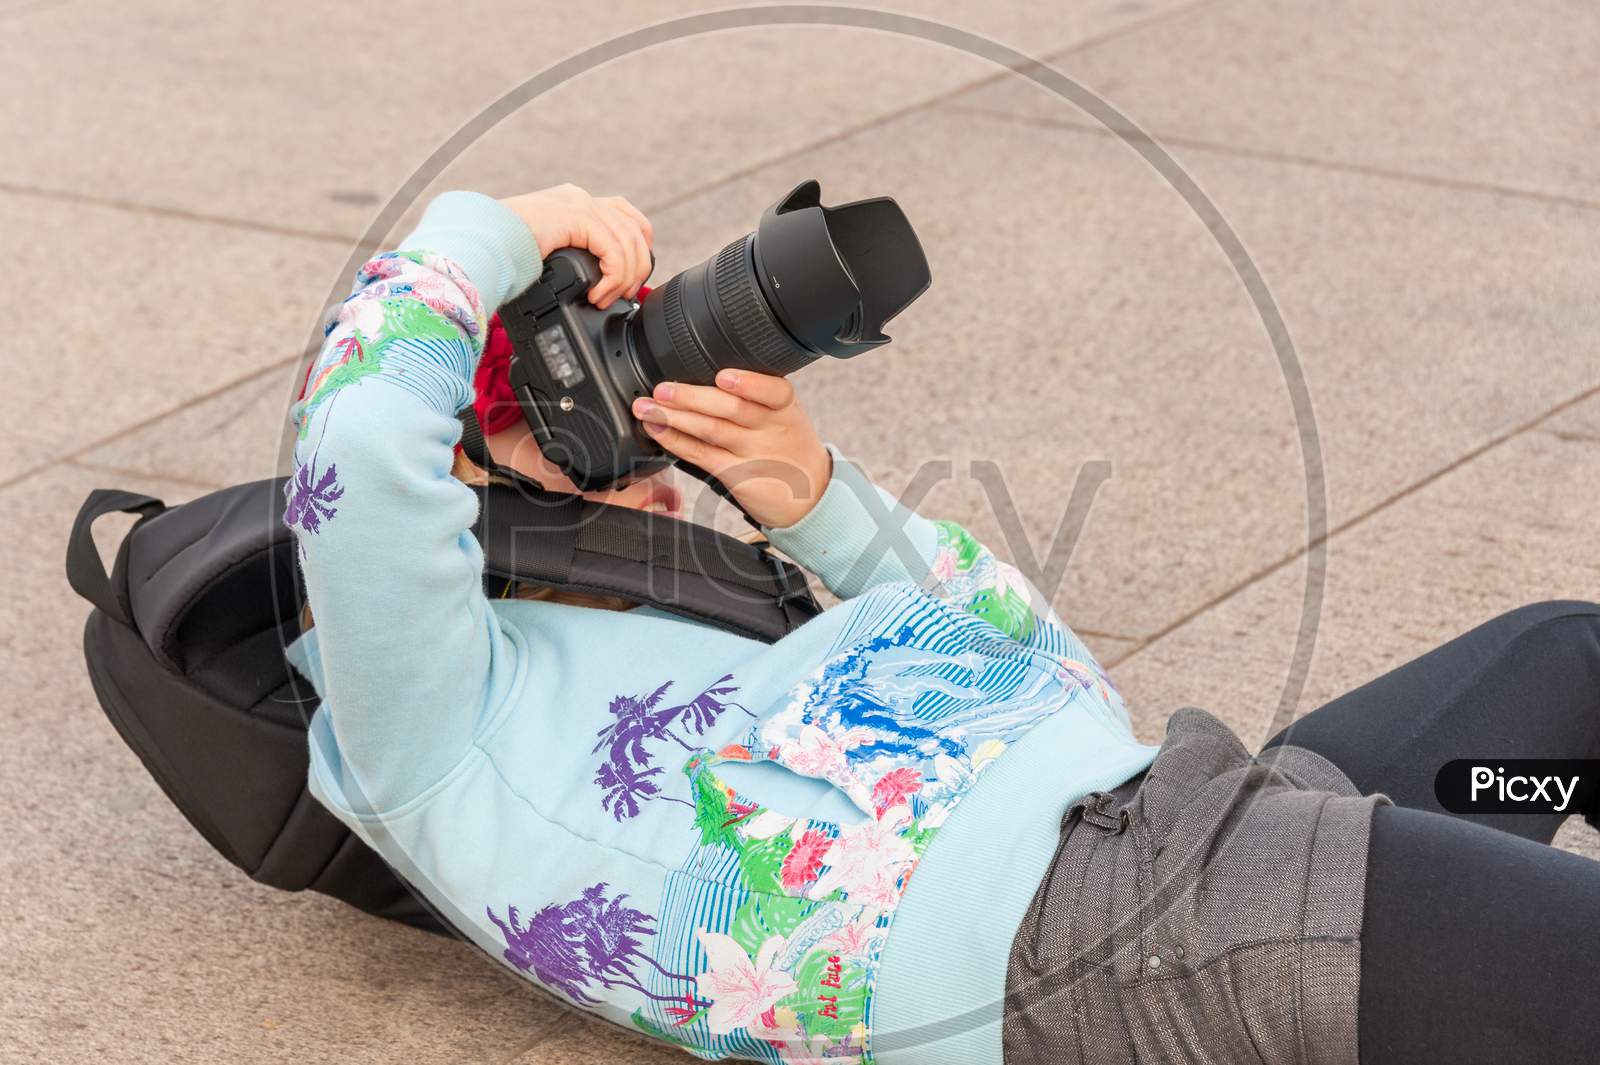 A Very Young Female Photographer Lays On Her Back While Using A Large Dslr Camera To Get The Perfect Angle